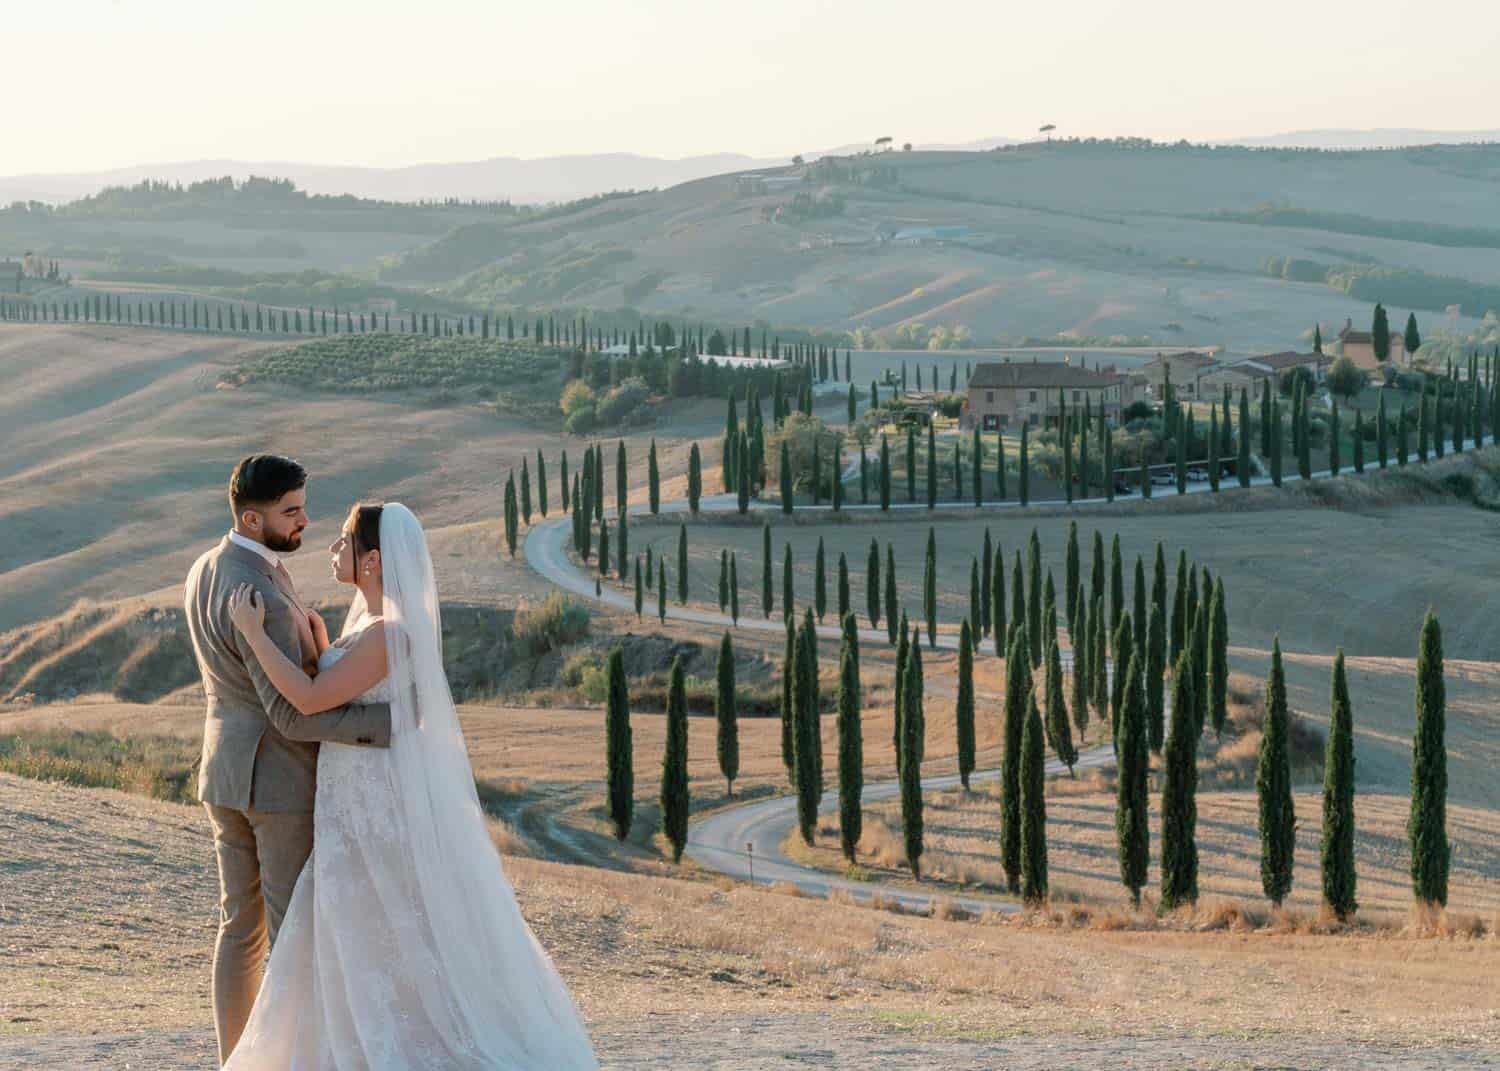 The Best Wedding Venues & Villas in Tuscany, Italy - Theresa Kelly Photography